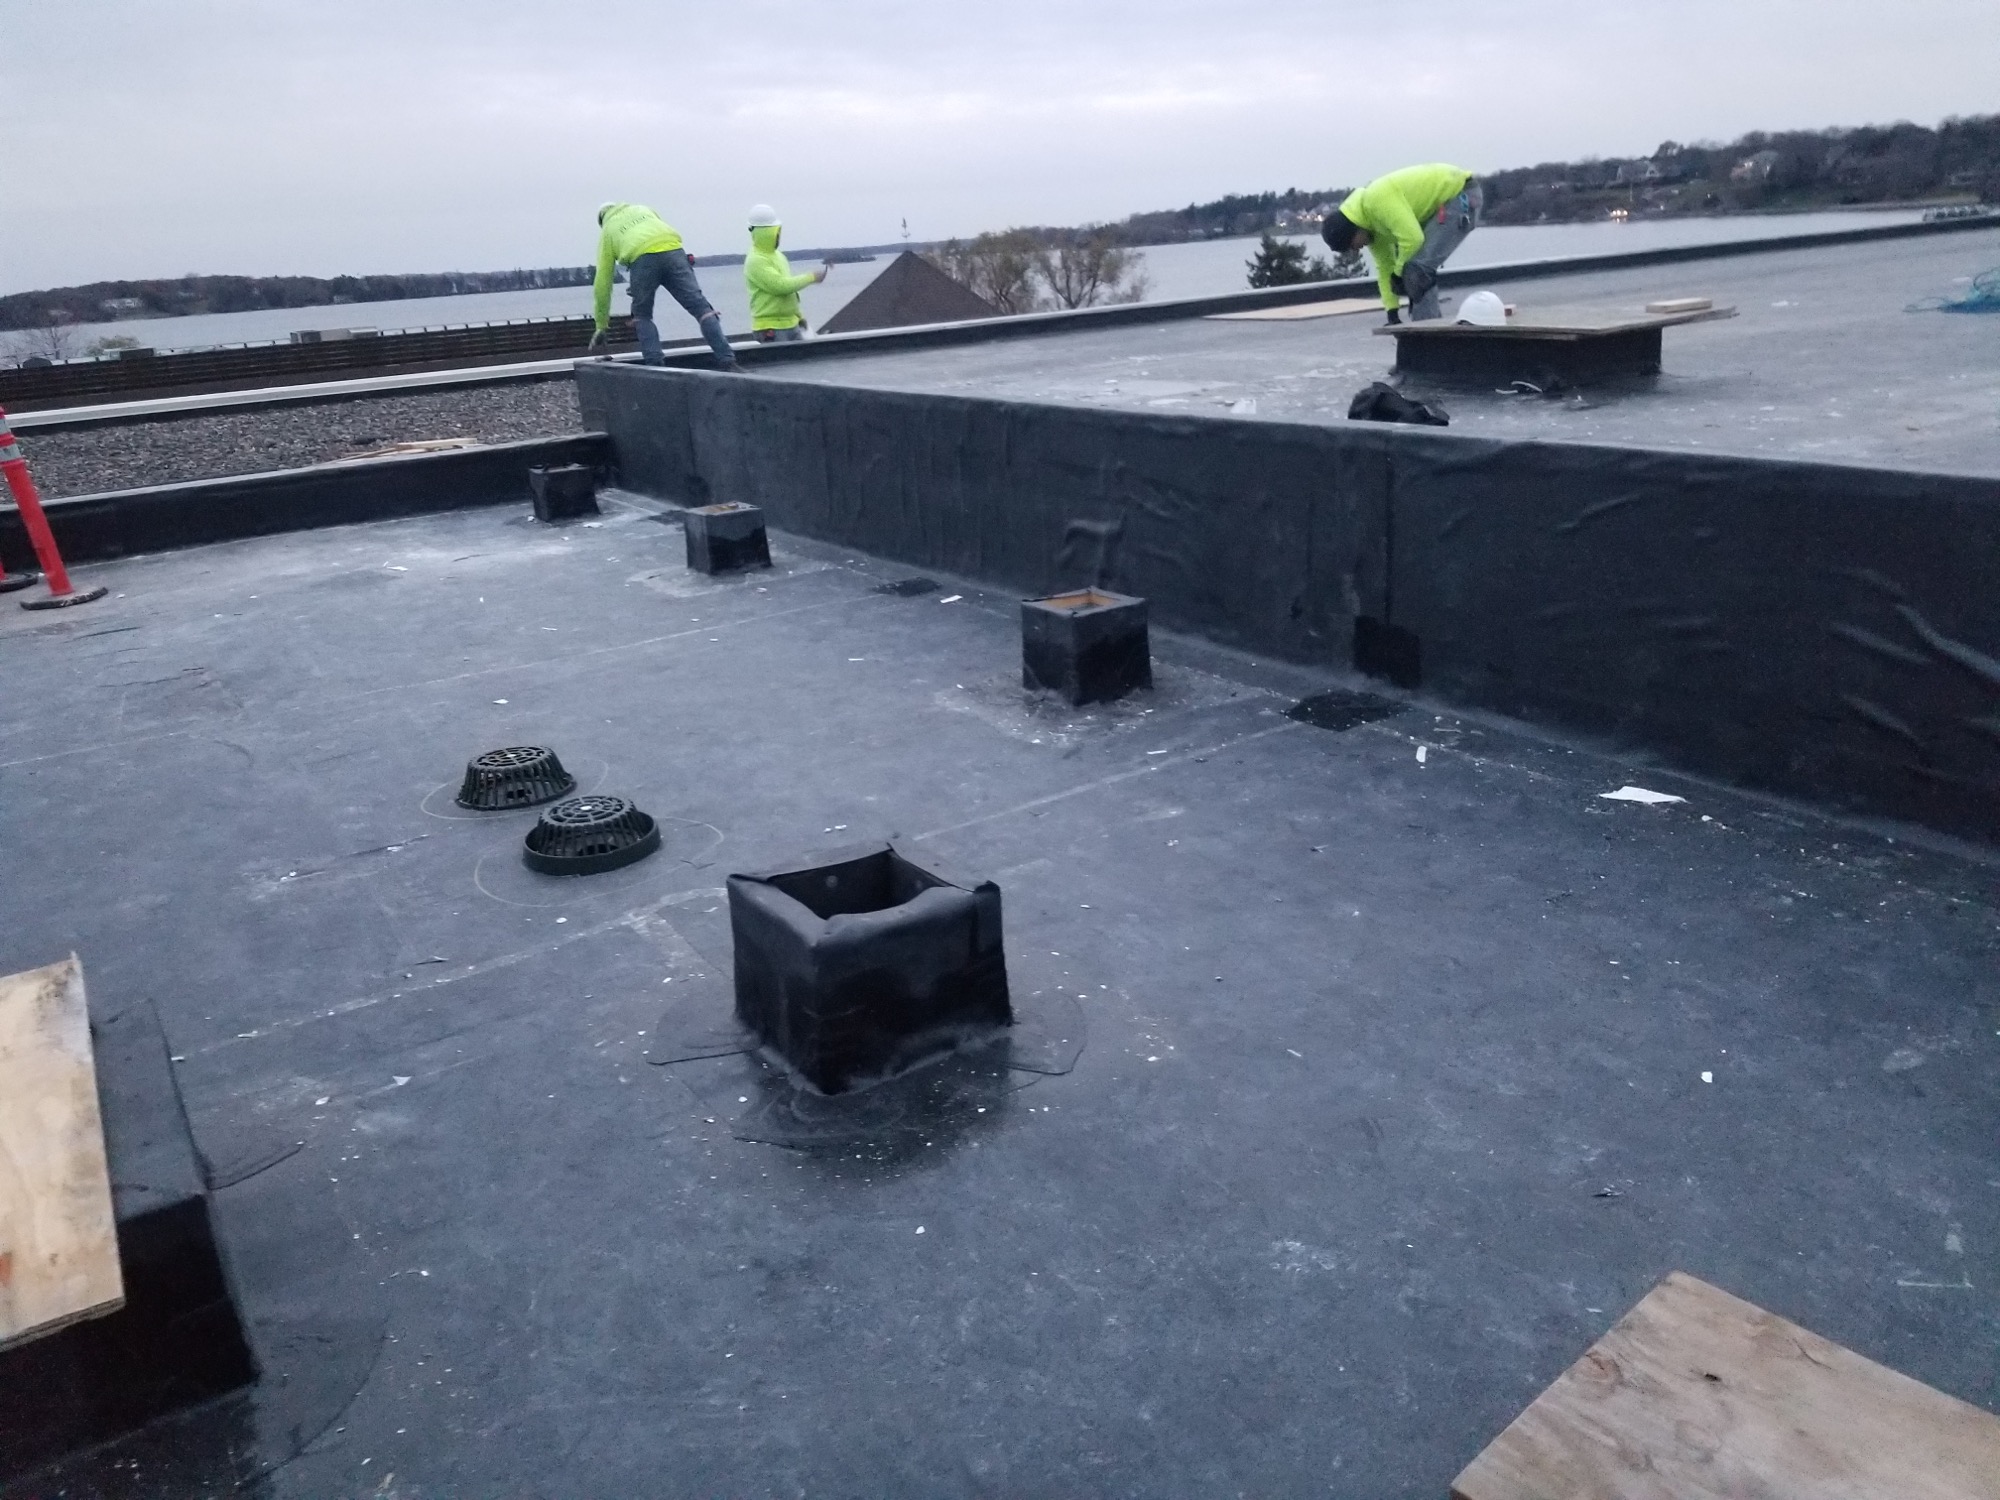 Roofers in bright yellow working on a flat roof